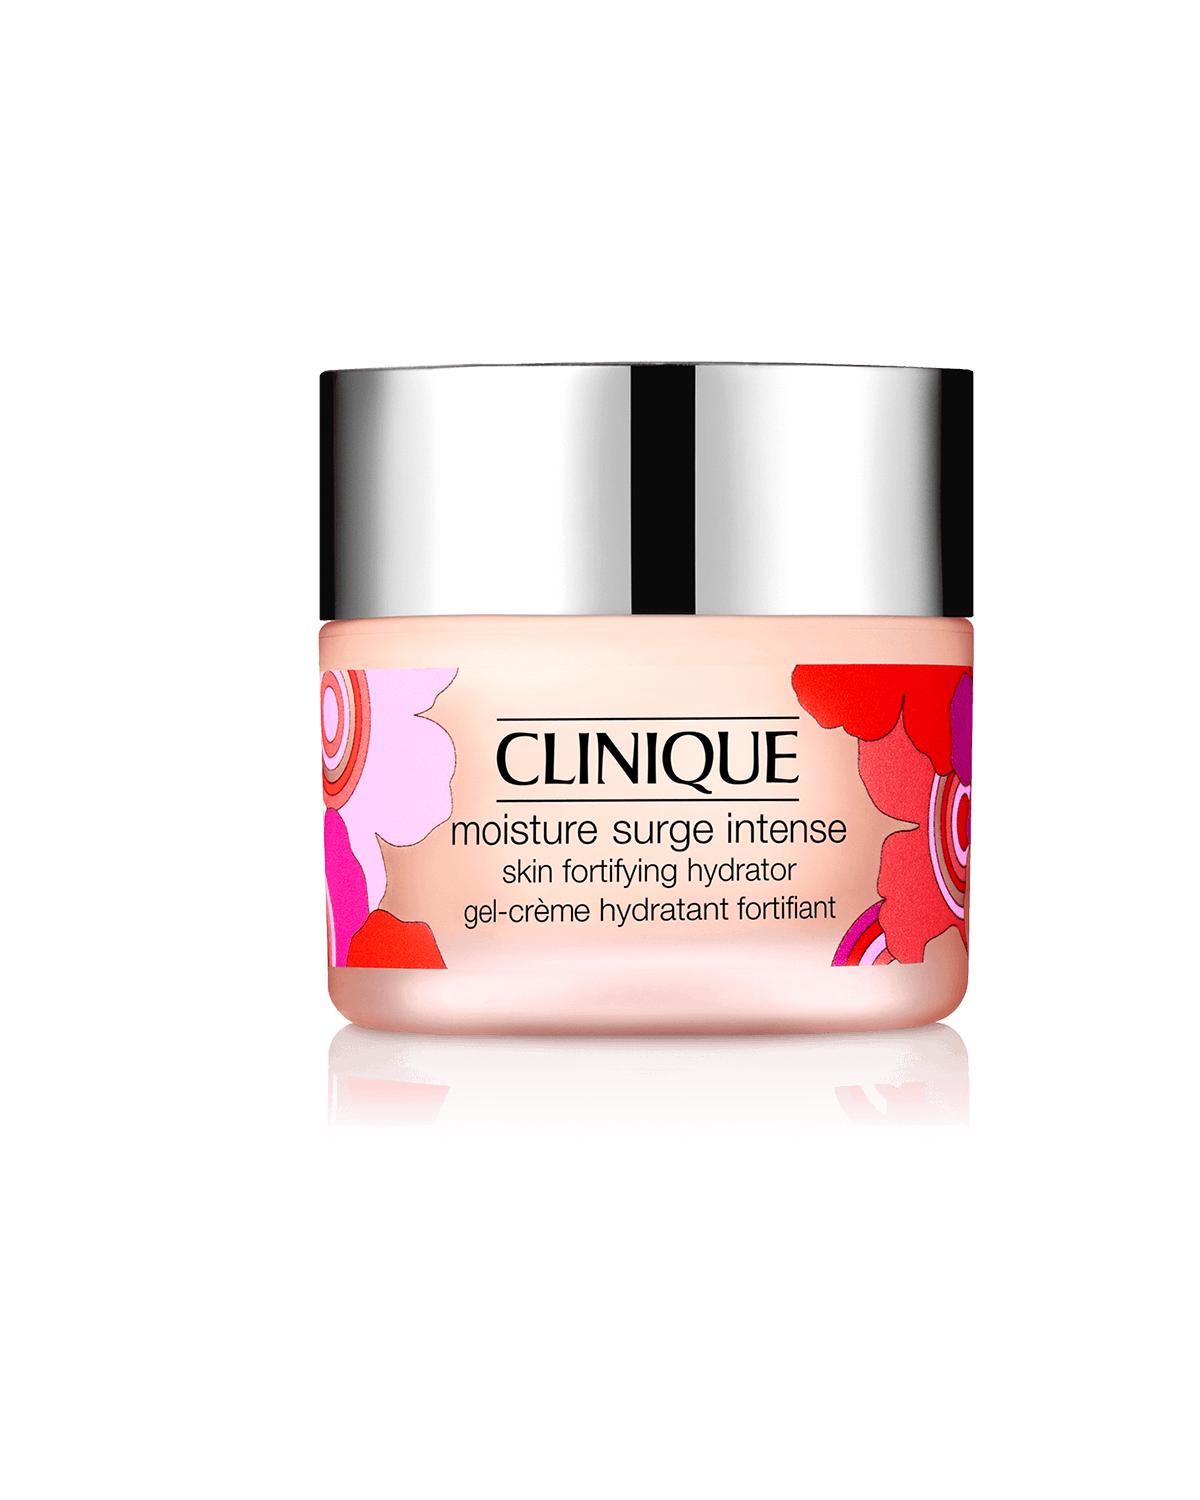 Limited Edition Moisture Surge Intense Skin Fortifying Hydrator